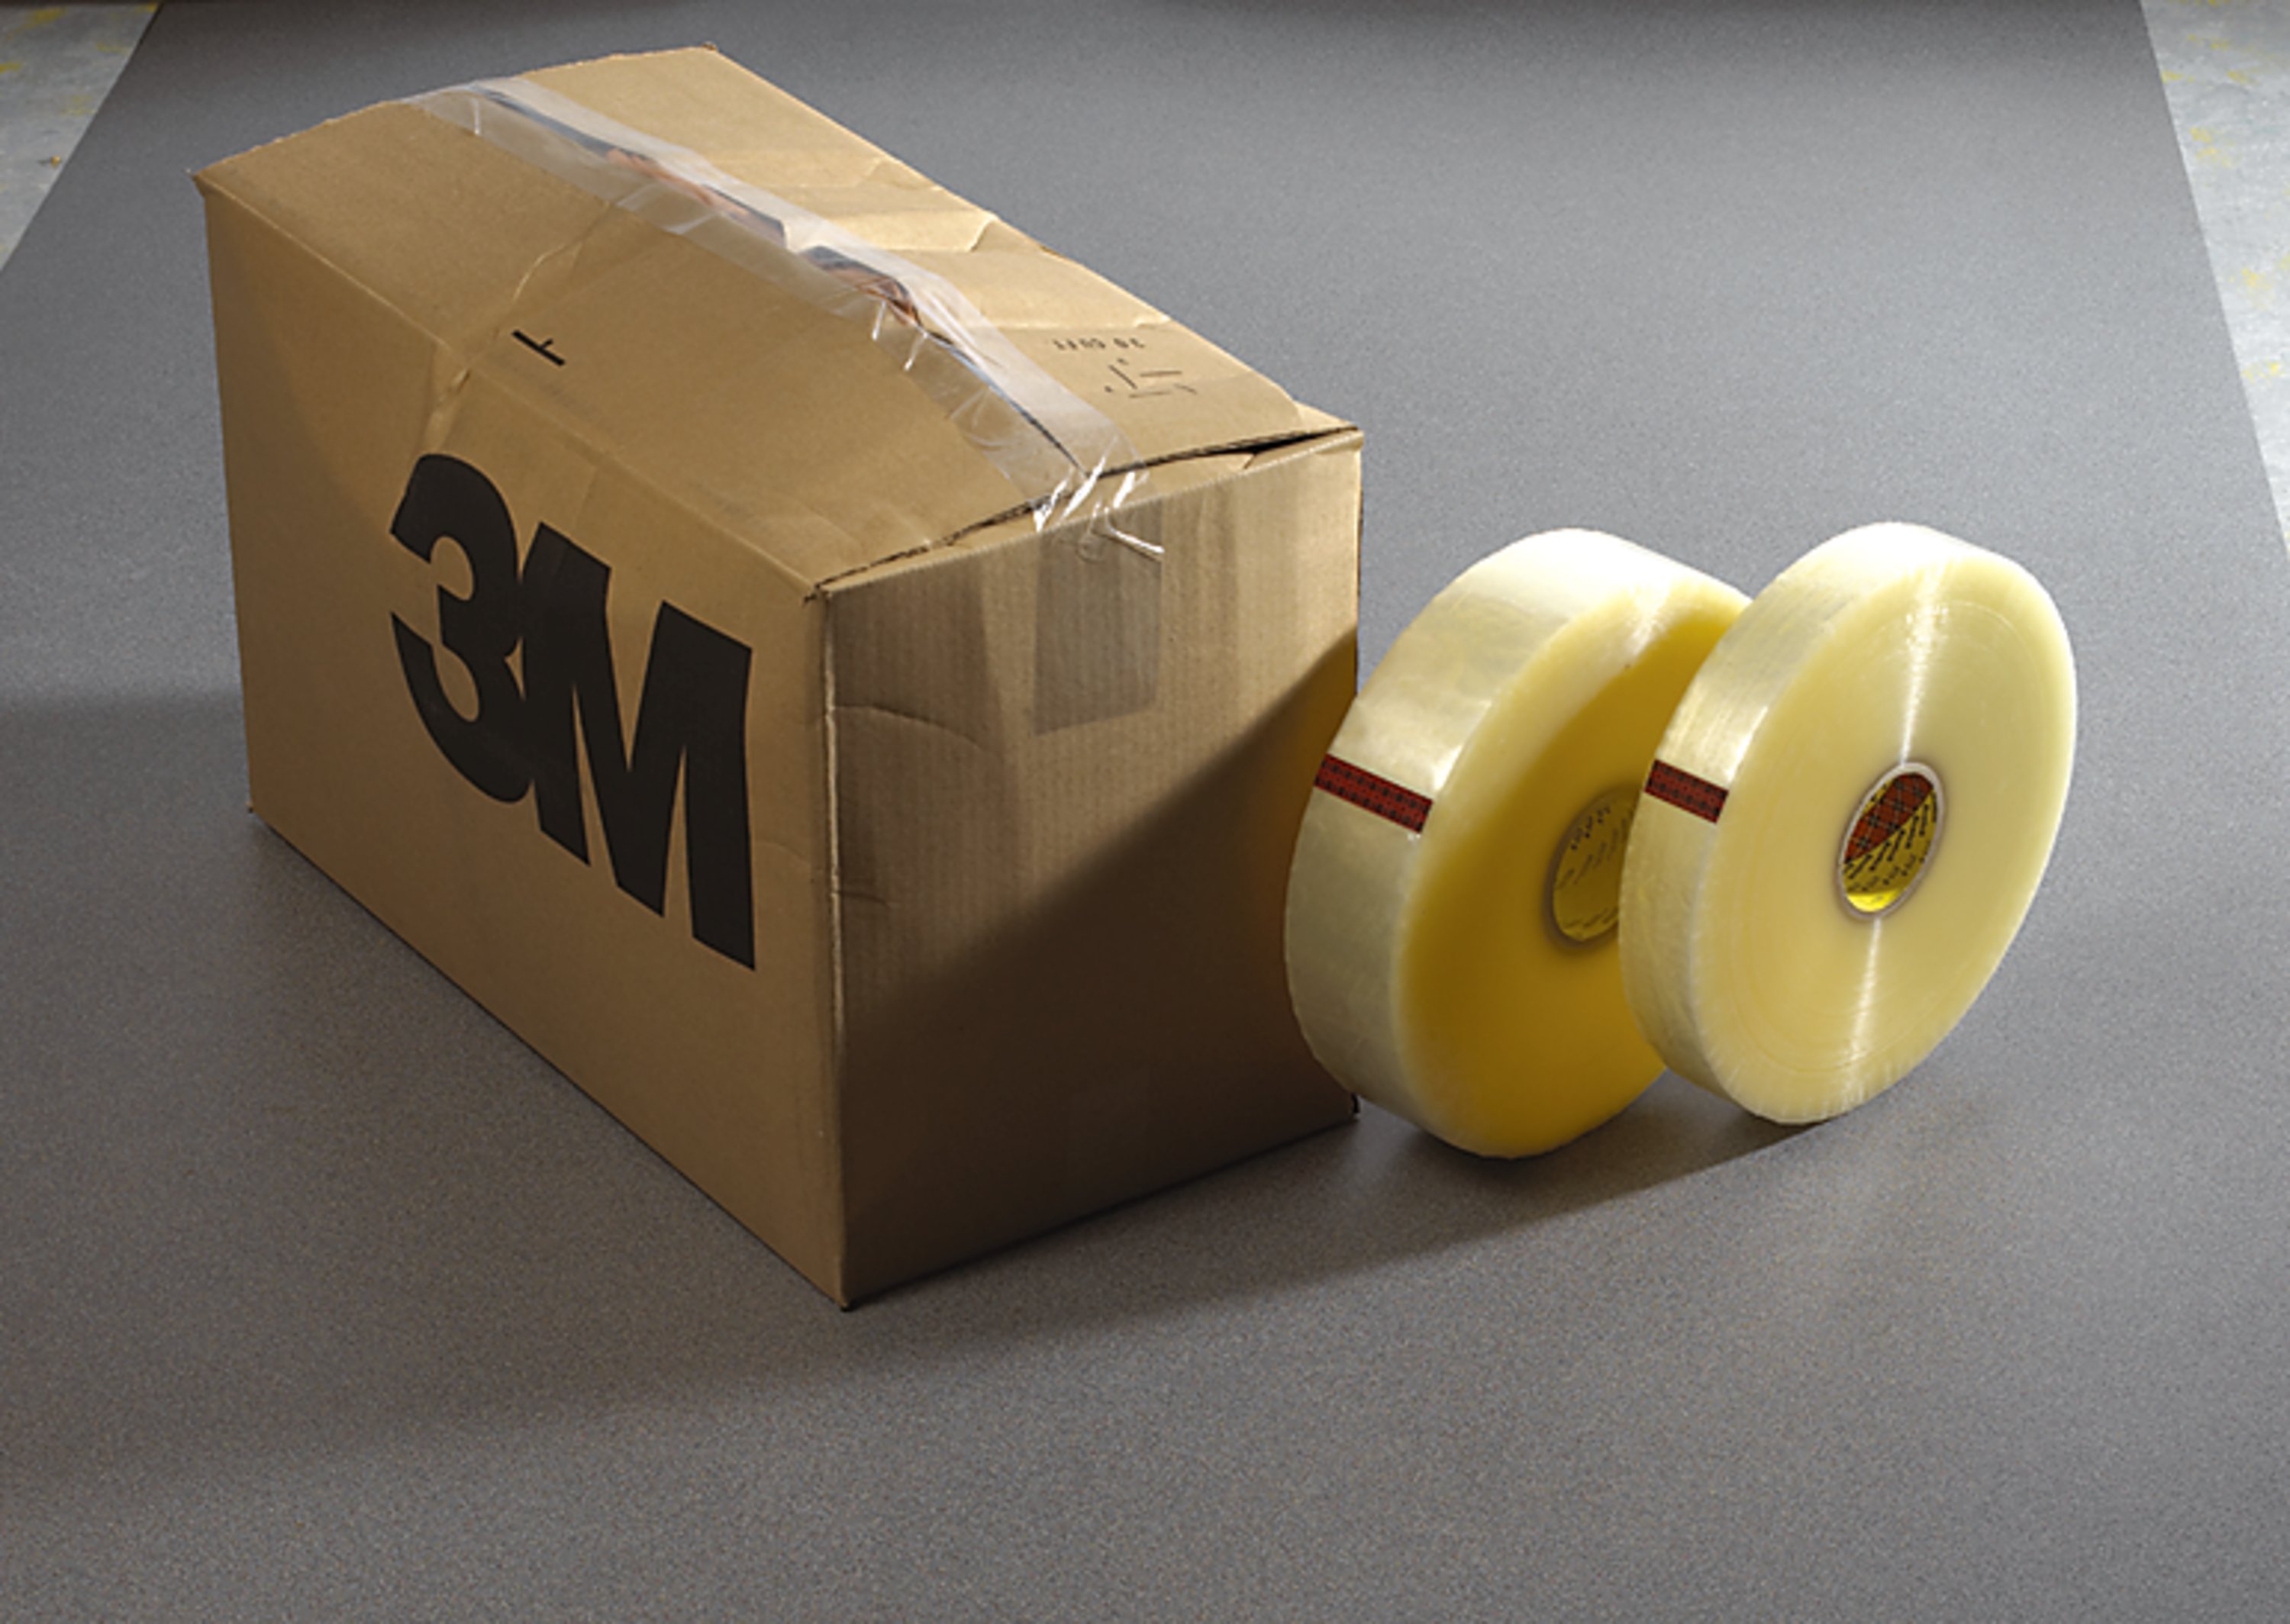 Scotch® Box Sealing Tape 351 is recommended for heavy box sealing (weighing up to 100 lbs.) and other demanding packaging applications.